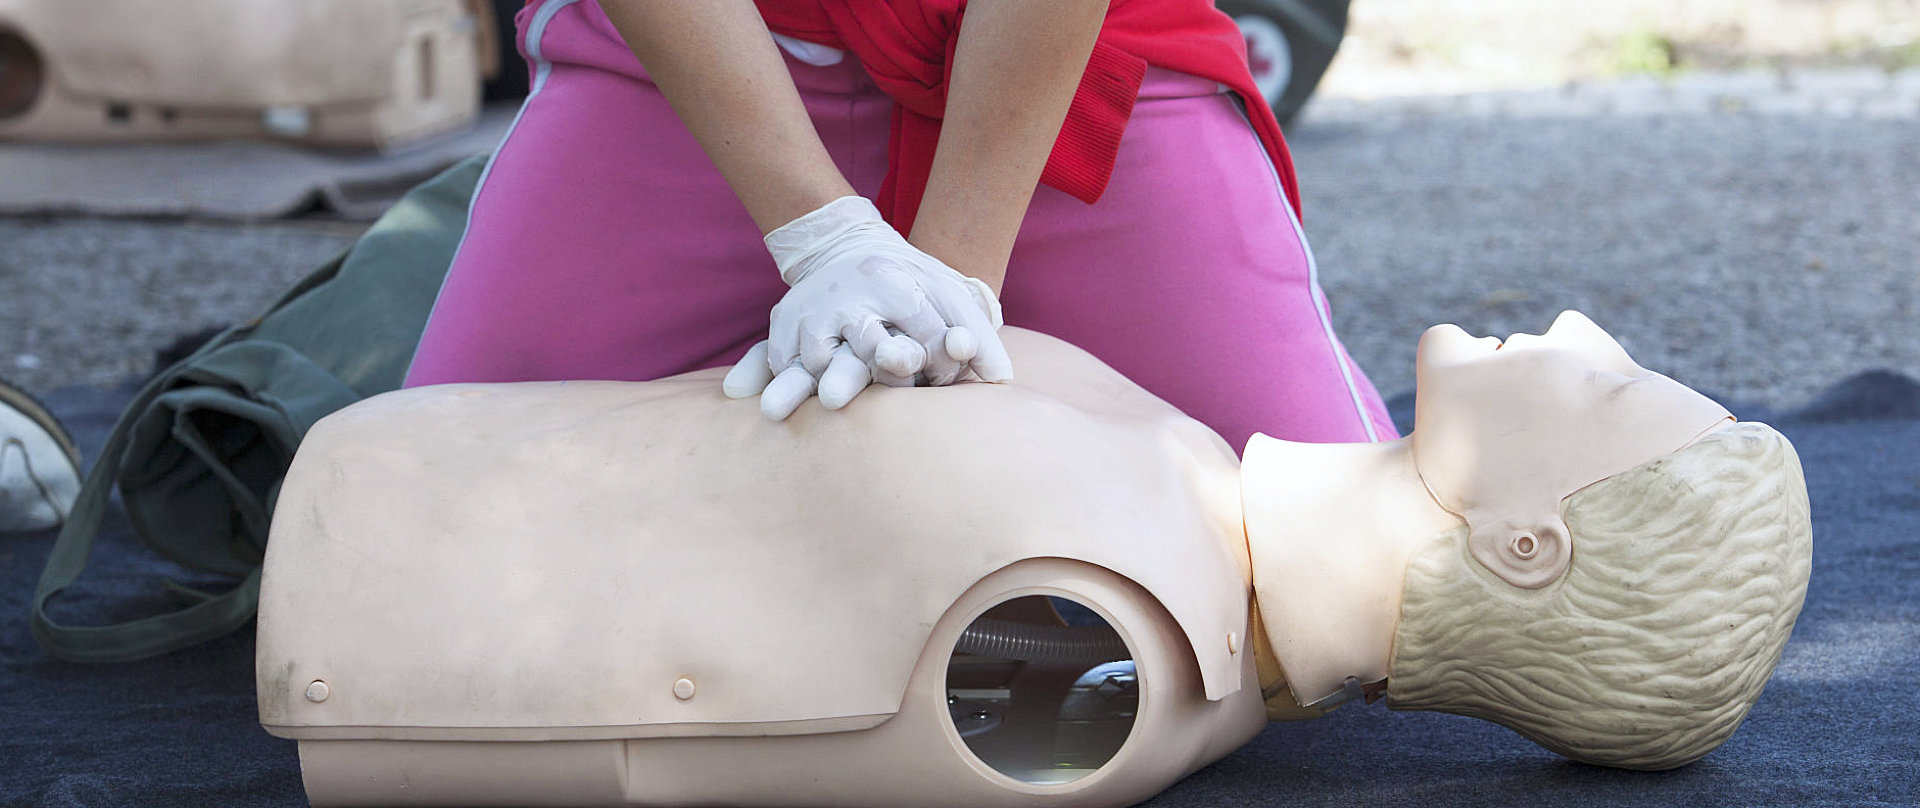 human doll used as a props for CPR training